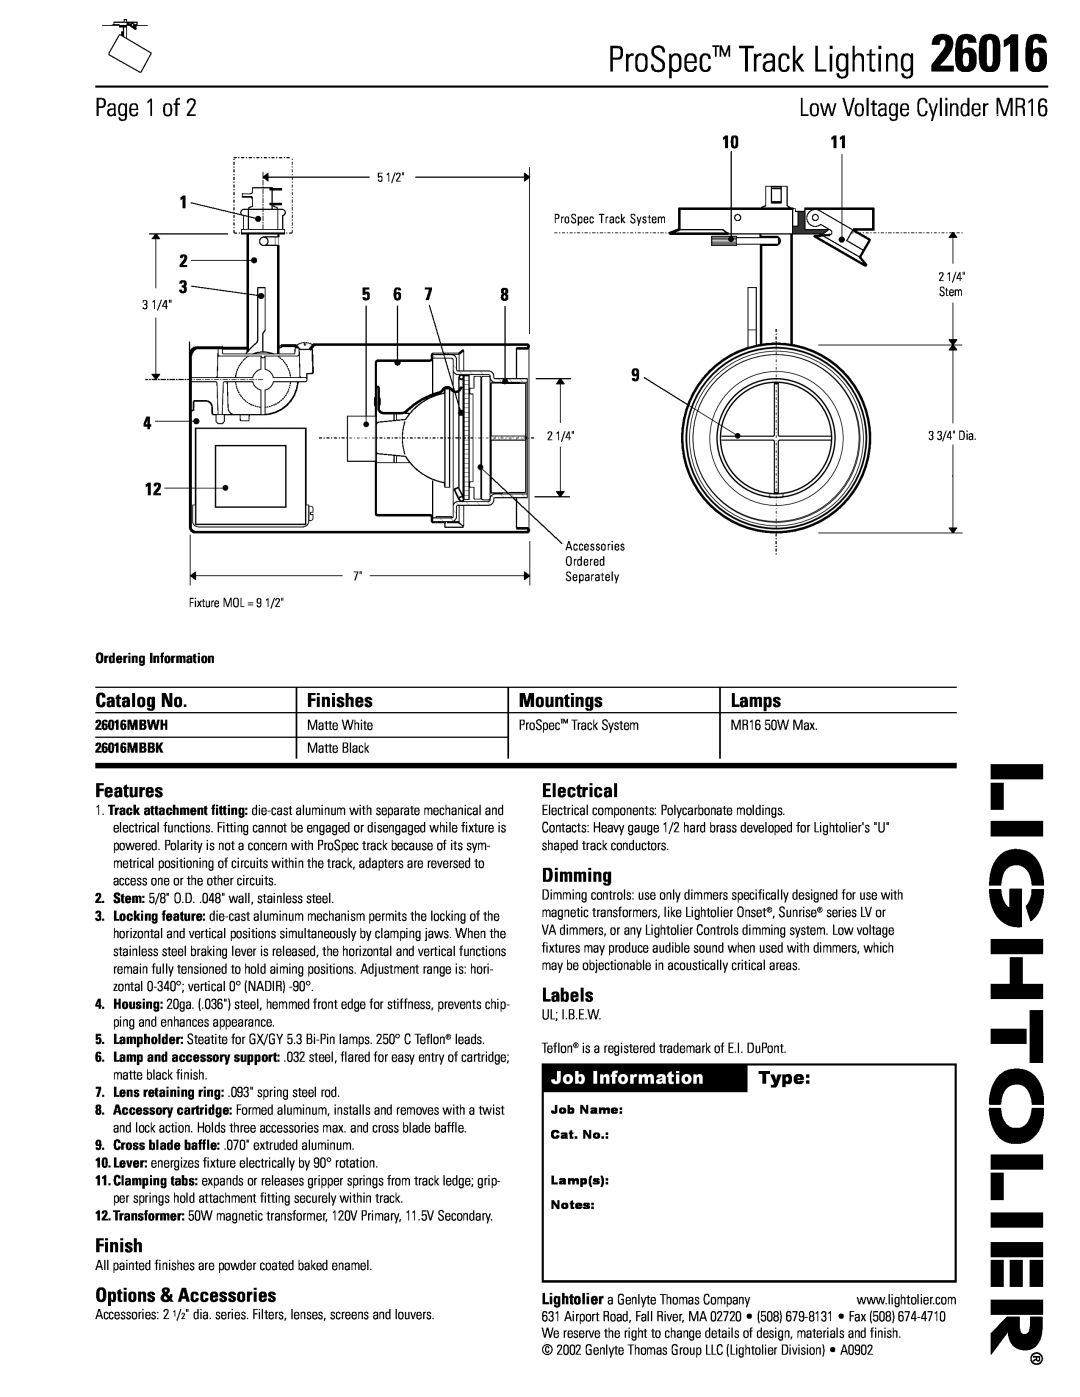 Lightolier 26016 manual Page 1 of, Low Voltage Cylinder MR16, ProSpec Track Lighting, Catalog No, Finishes, Mountings 